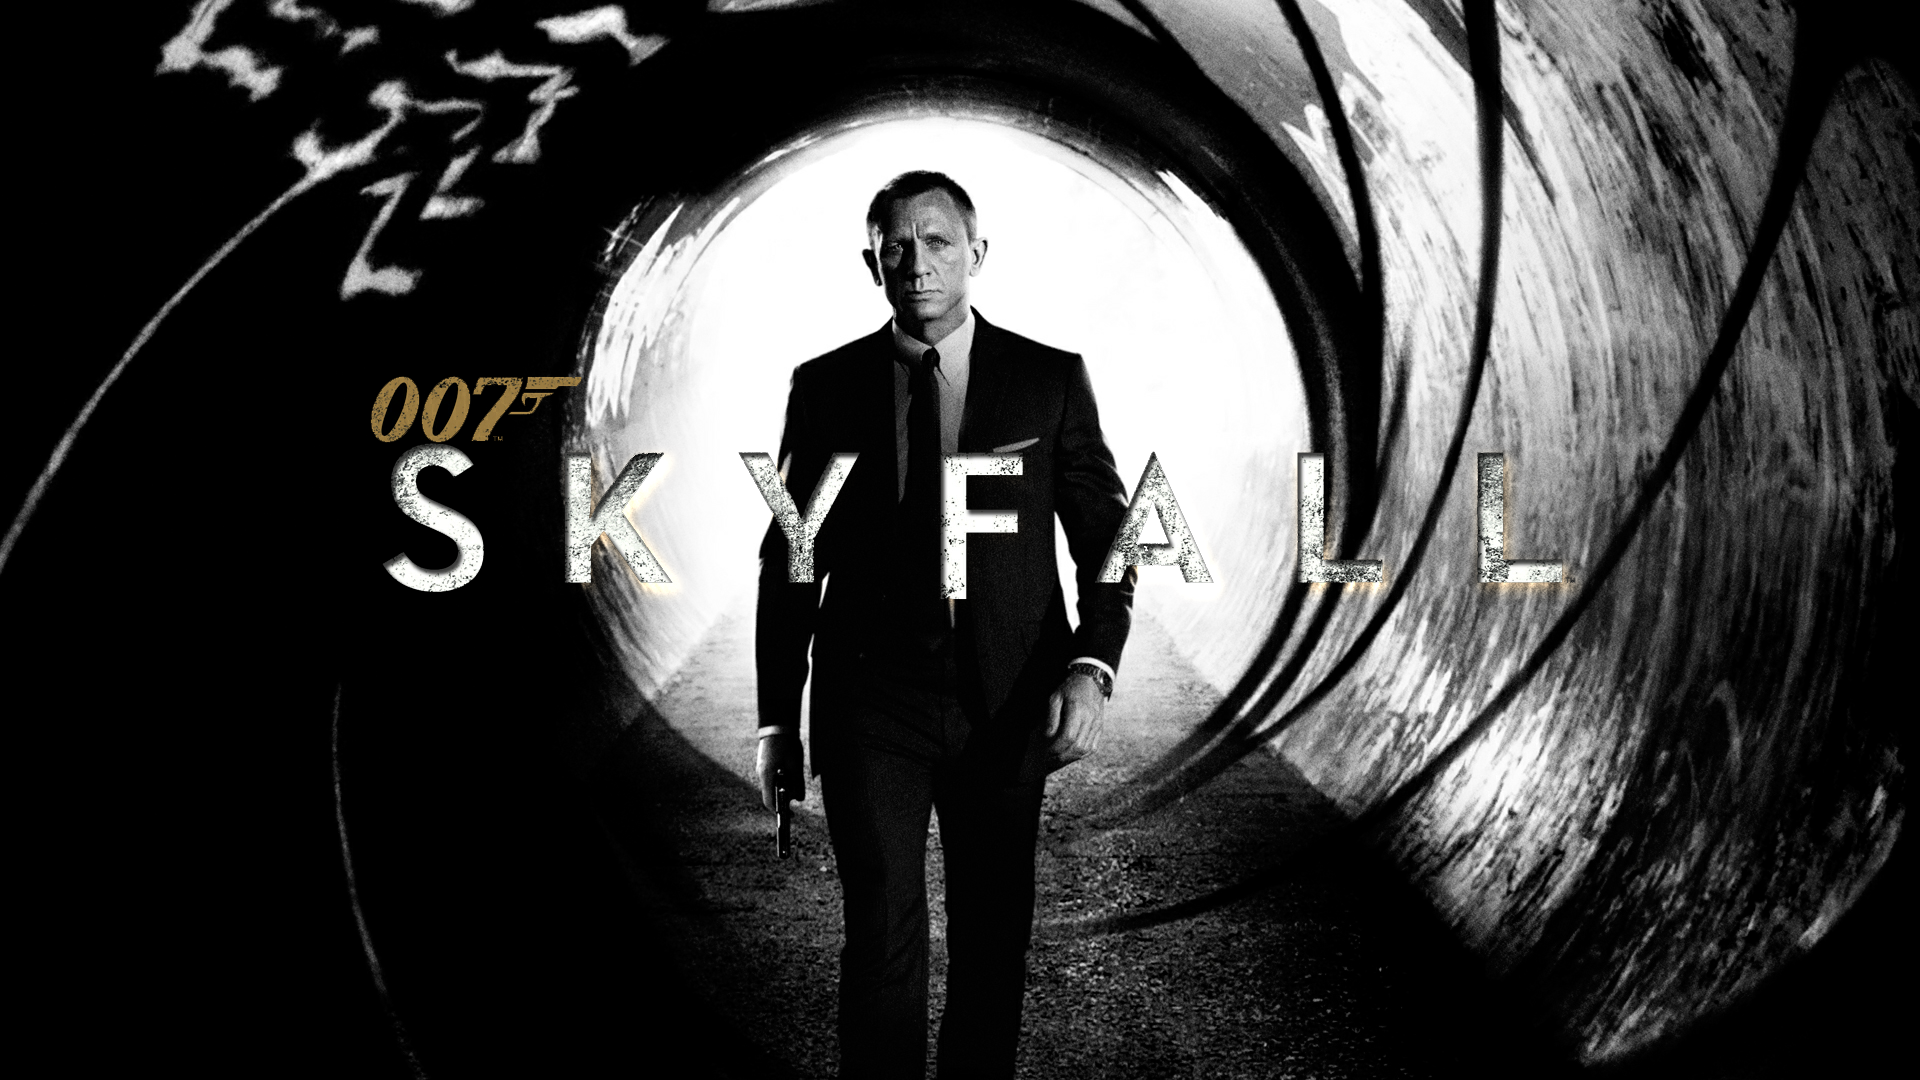 Skyfall download the new